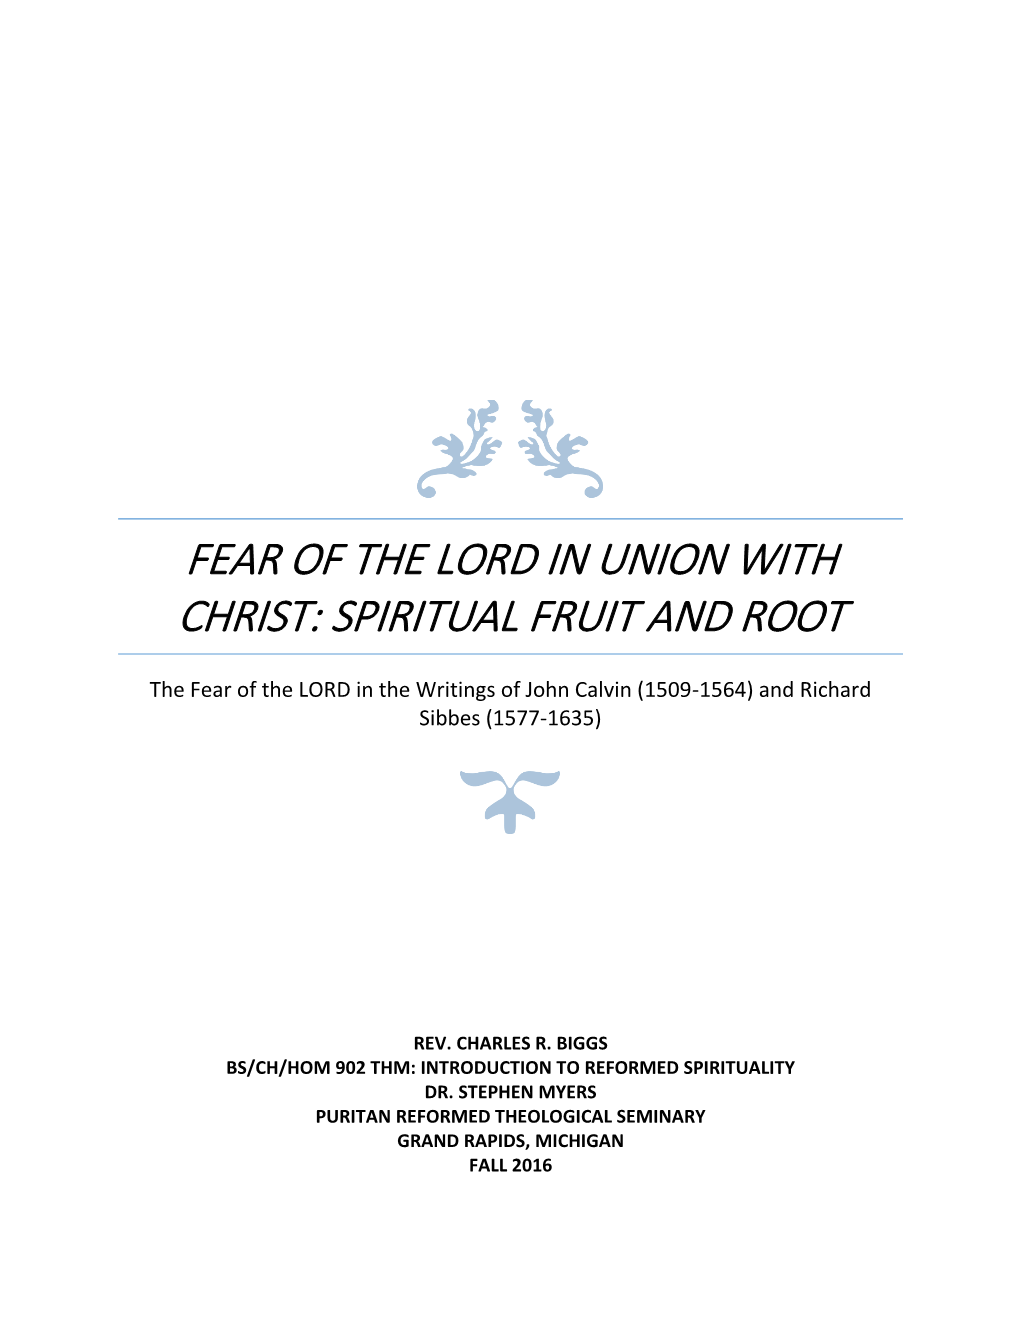 Fear of the Lord in Union with Christ: Spiritual Fruit and Root